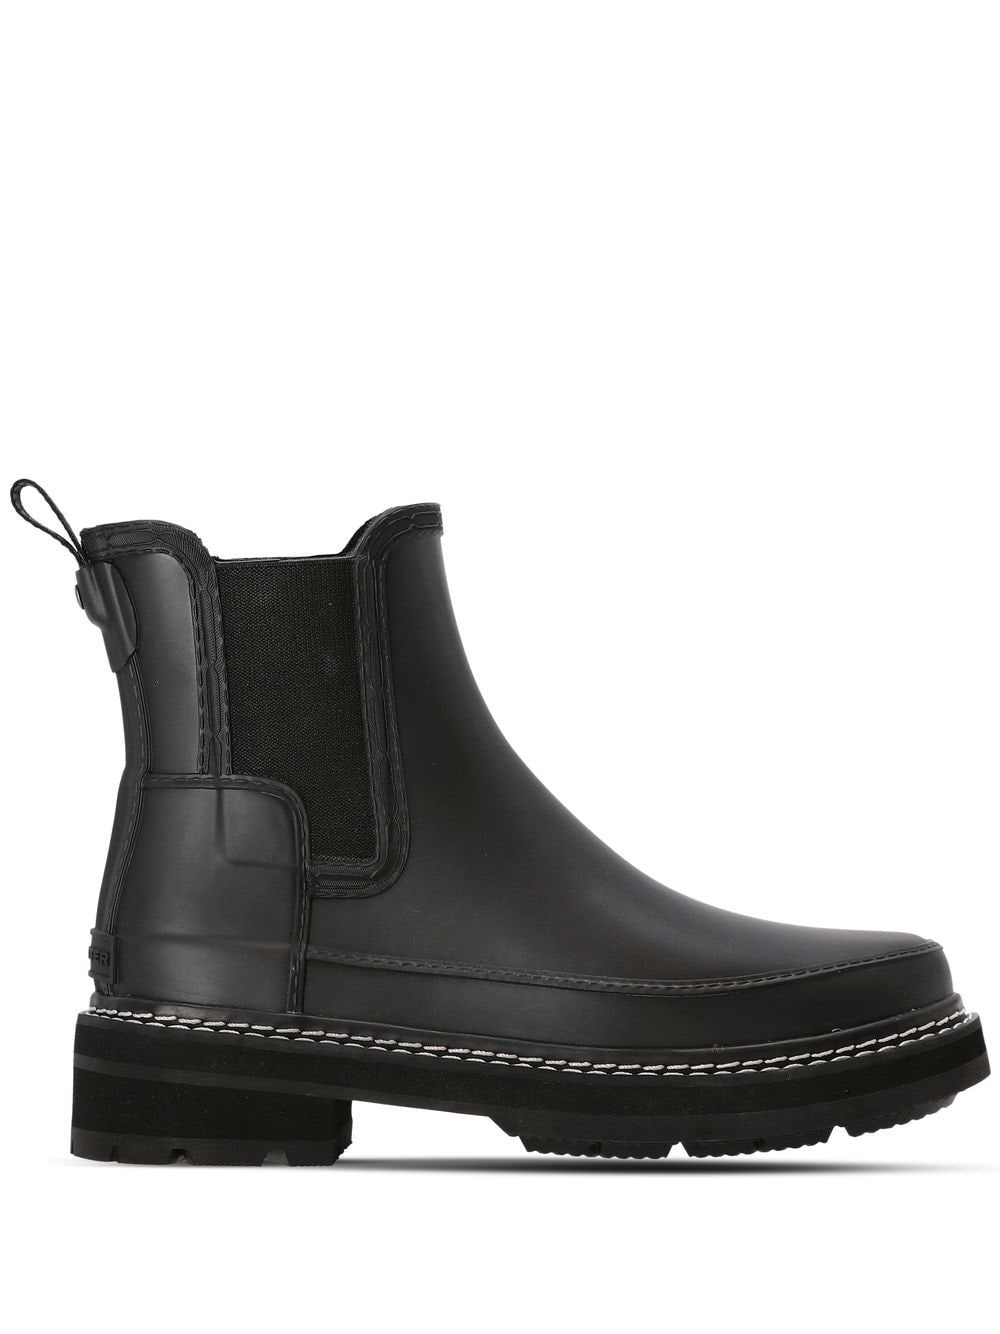 HUNTER REFINED STITCH-DETAIL CHELSEA BOOT